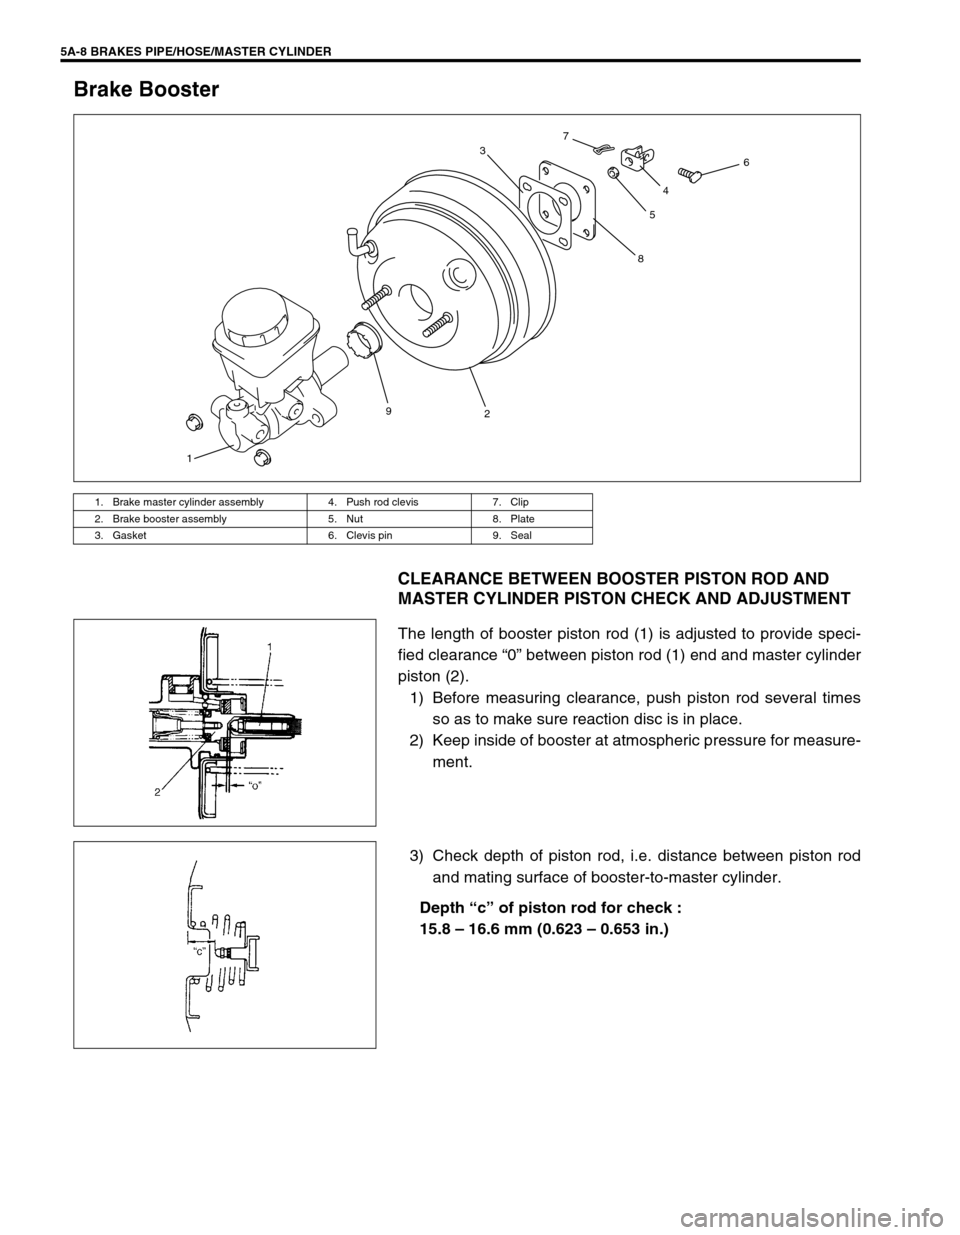 SUZUKI GRAND VITARA 2001 2.G Owners Manual 5A-8 BRAKES PIPE/HOSE/MASTER CYLINDER
Brake Booster
CLEARANCE BETWEEN BOOSTER PISTON ROD AND 
MASTER CYLINDER PISTON CHECK AND ADJUSTMENT
The length of booster piston rod (1) is adjusted to provide sp